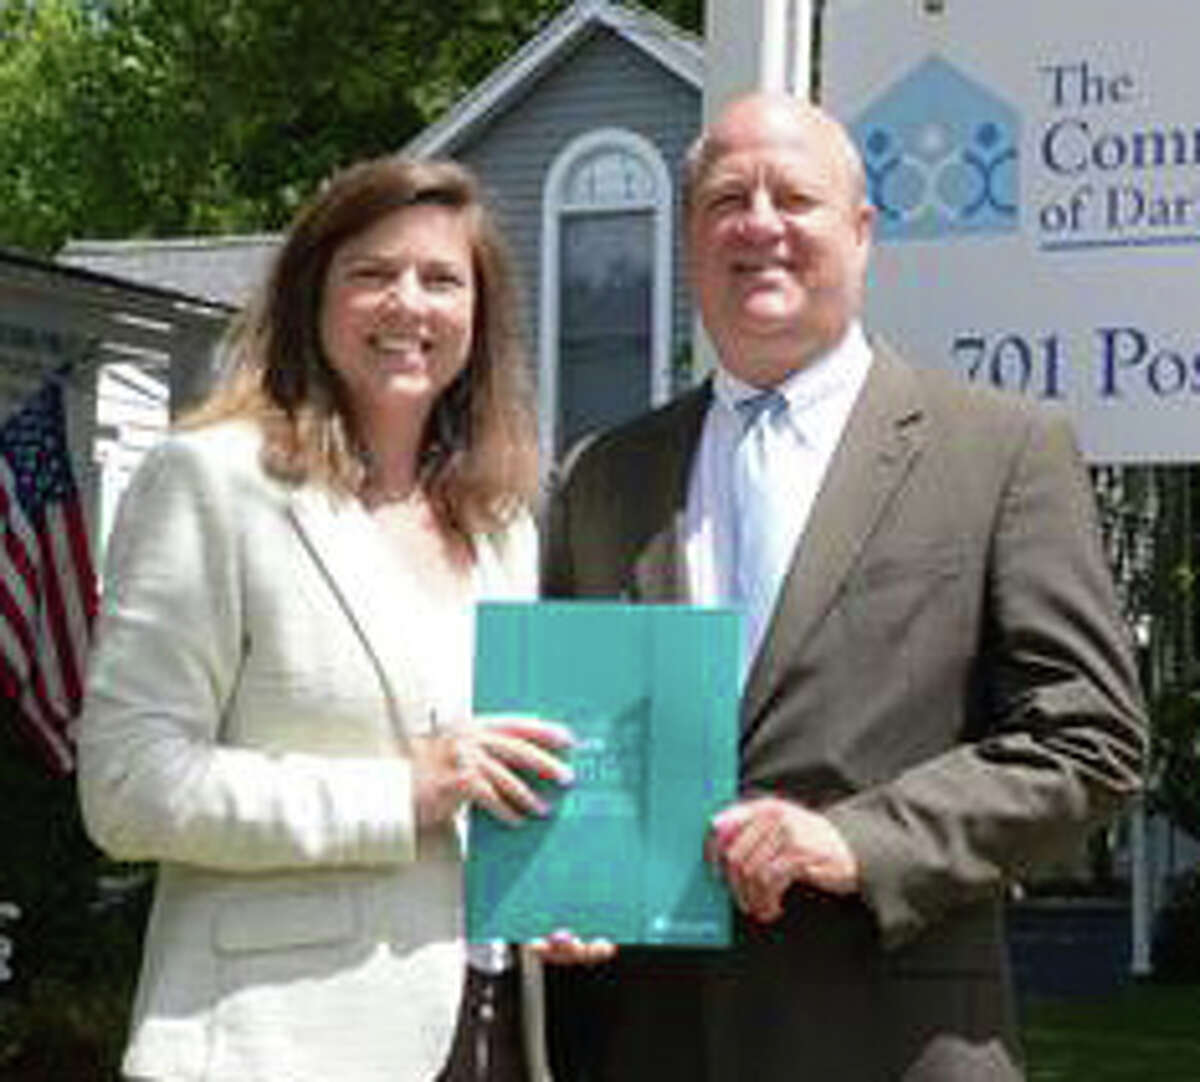 Carrie Bernier, executive director of The Community Fund of Darien, accepts a donation from Mark Rosenbloom, of First County Bank